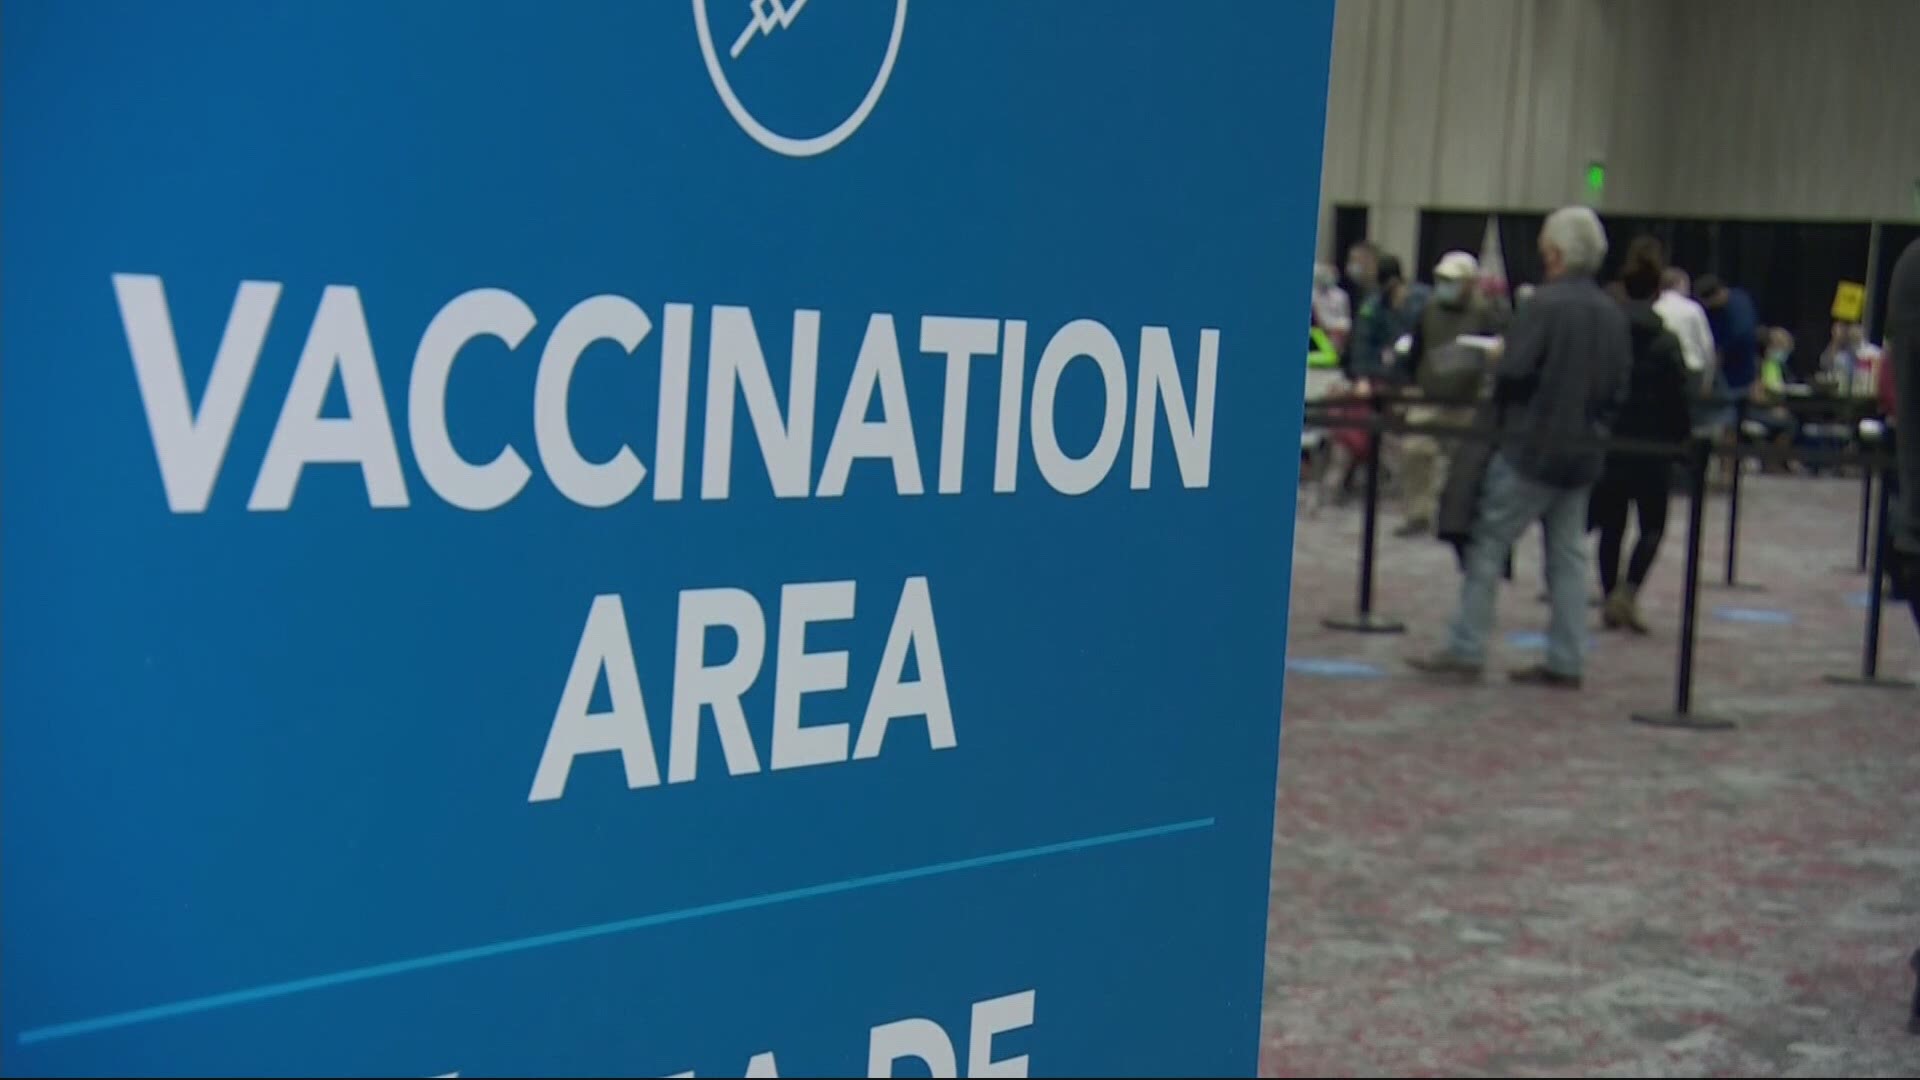 Several health centers in Oregon are part of a new federal vaccine program. As Morgan Romero reports, the goal is to vaccinate underserved communities.